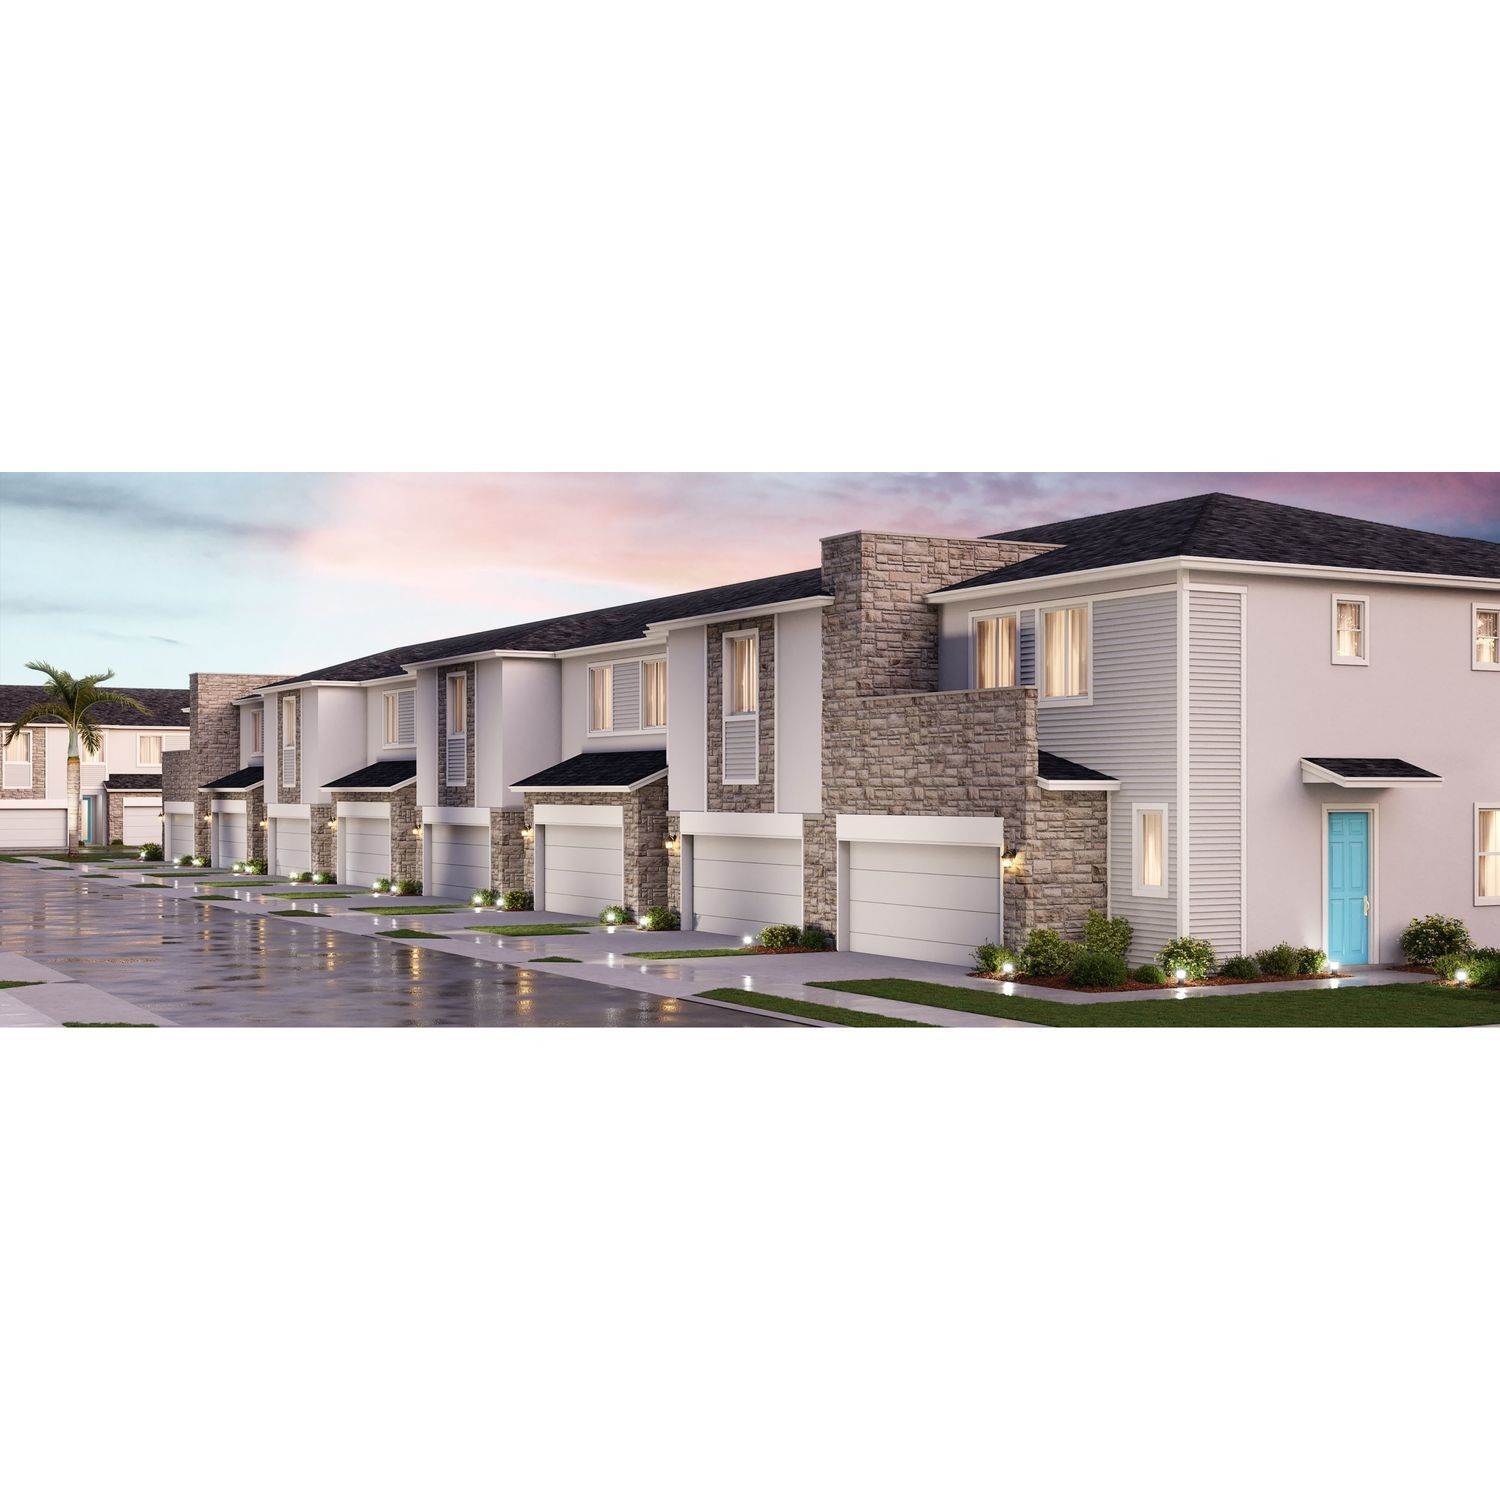 16. Champions Pointe - Champions Pointe Townhomes II xây dựng tại 224 Nine Iron Drive, Davenport, FL 33896